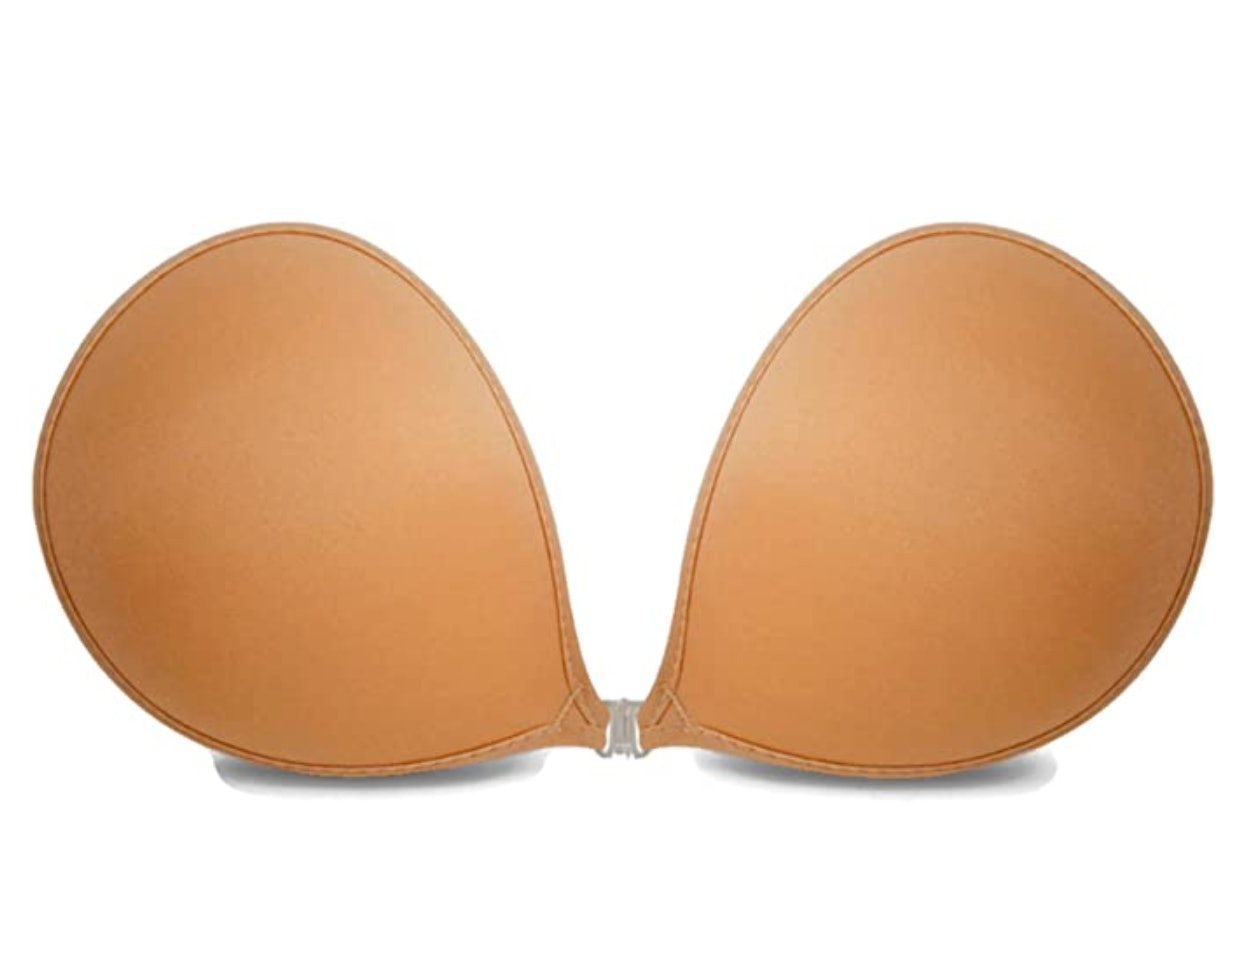 How To Go Braless And Still Feel Supported: Nipple Covers, Sticky Boobs, &  More Solutions